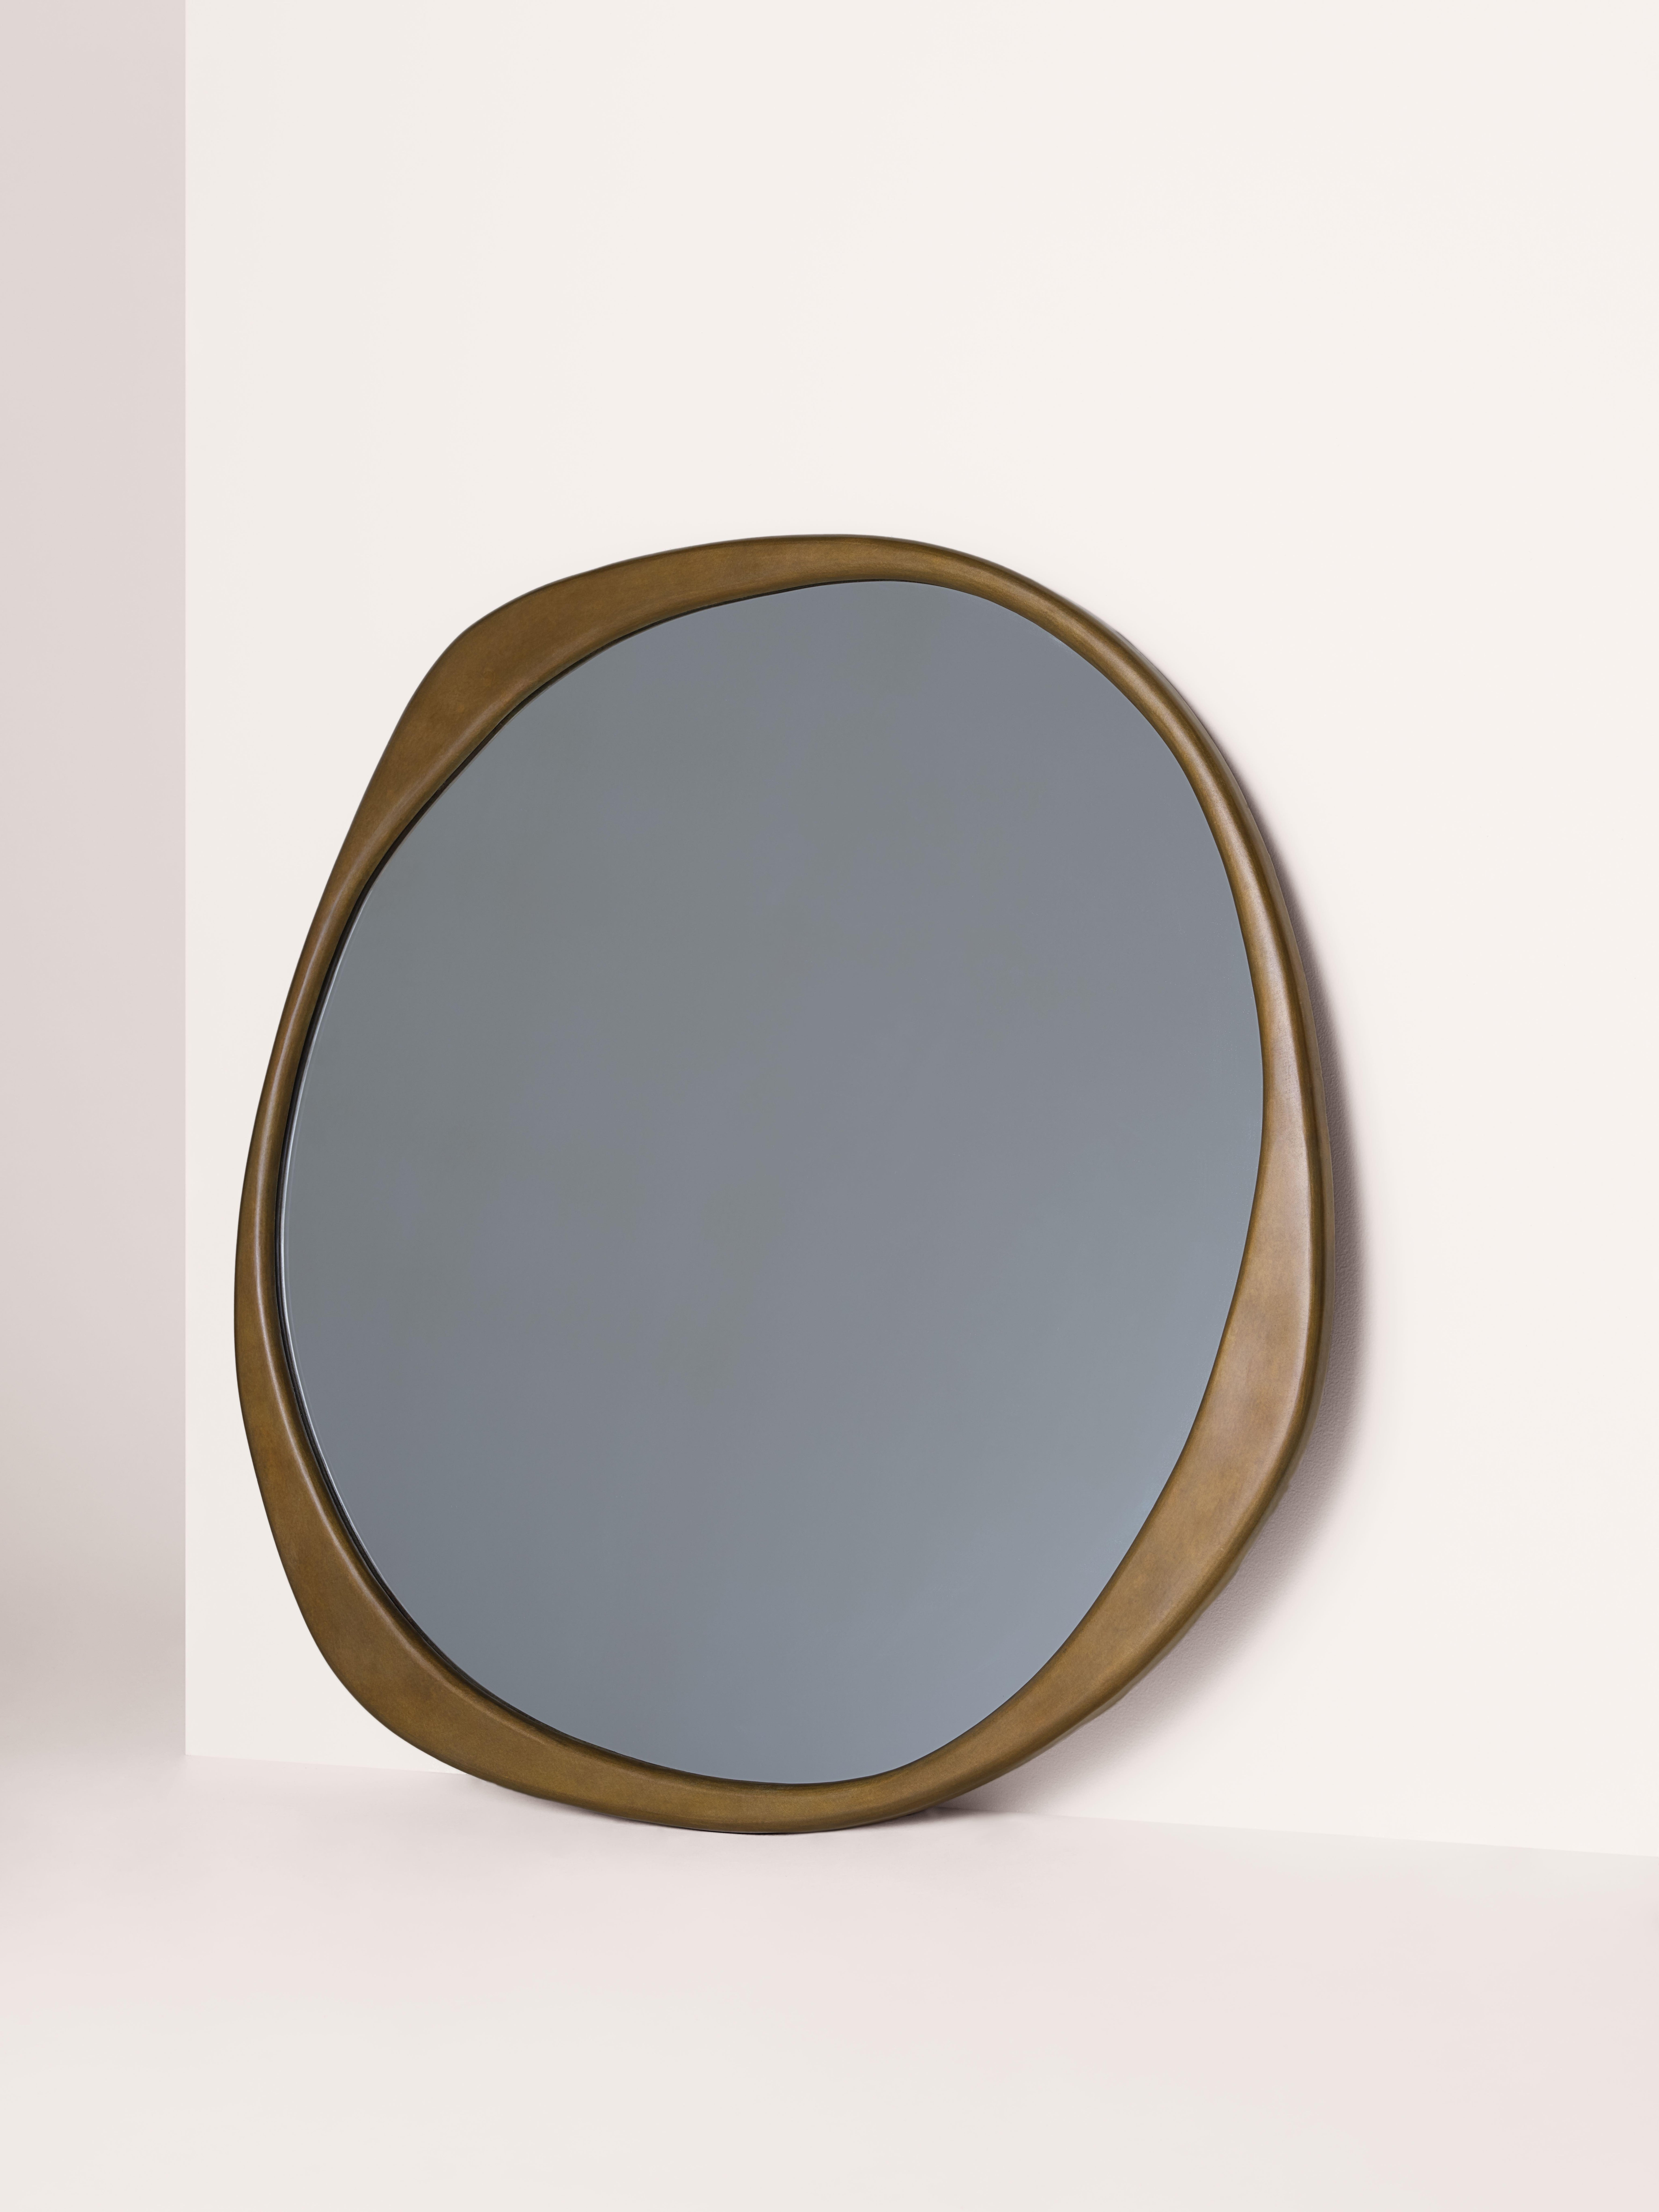 The sculptural A.Cepa mirror in hand-patina bronze is cast in bronze at a fine art foundry in Pennsylvania, and skillfully patinated by hand. Undulating and irregular in form, the A. Cepa mirror is the focal point in any room with its captivating